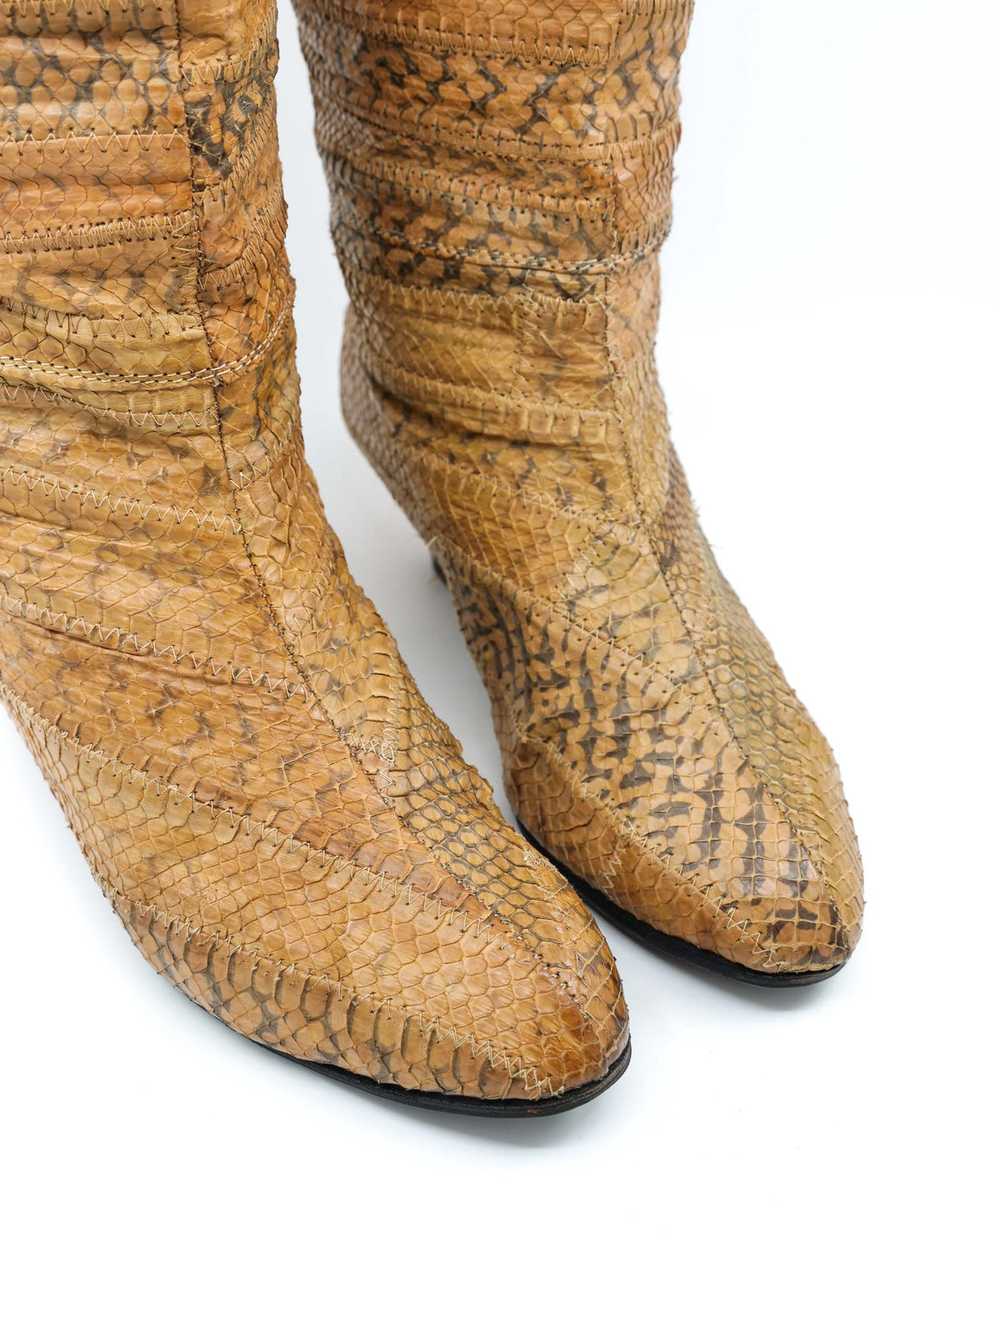 1980s Tan Patchwork Snakeskin Knee High Boots, 7 - image 2